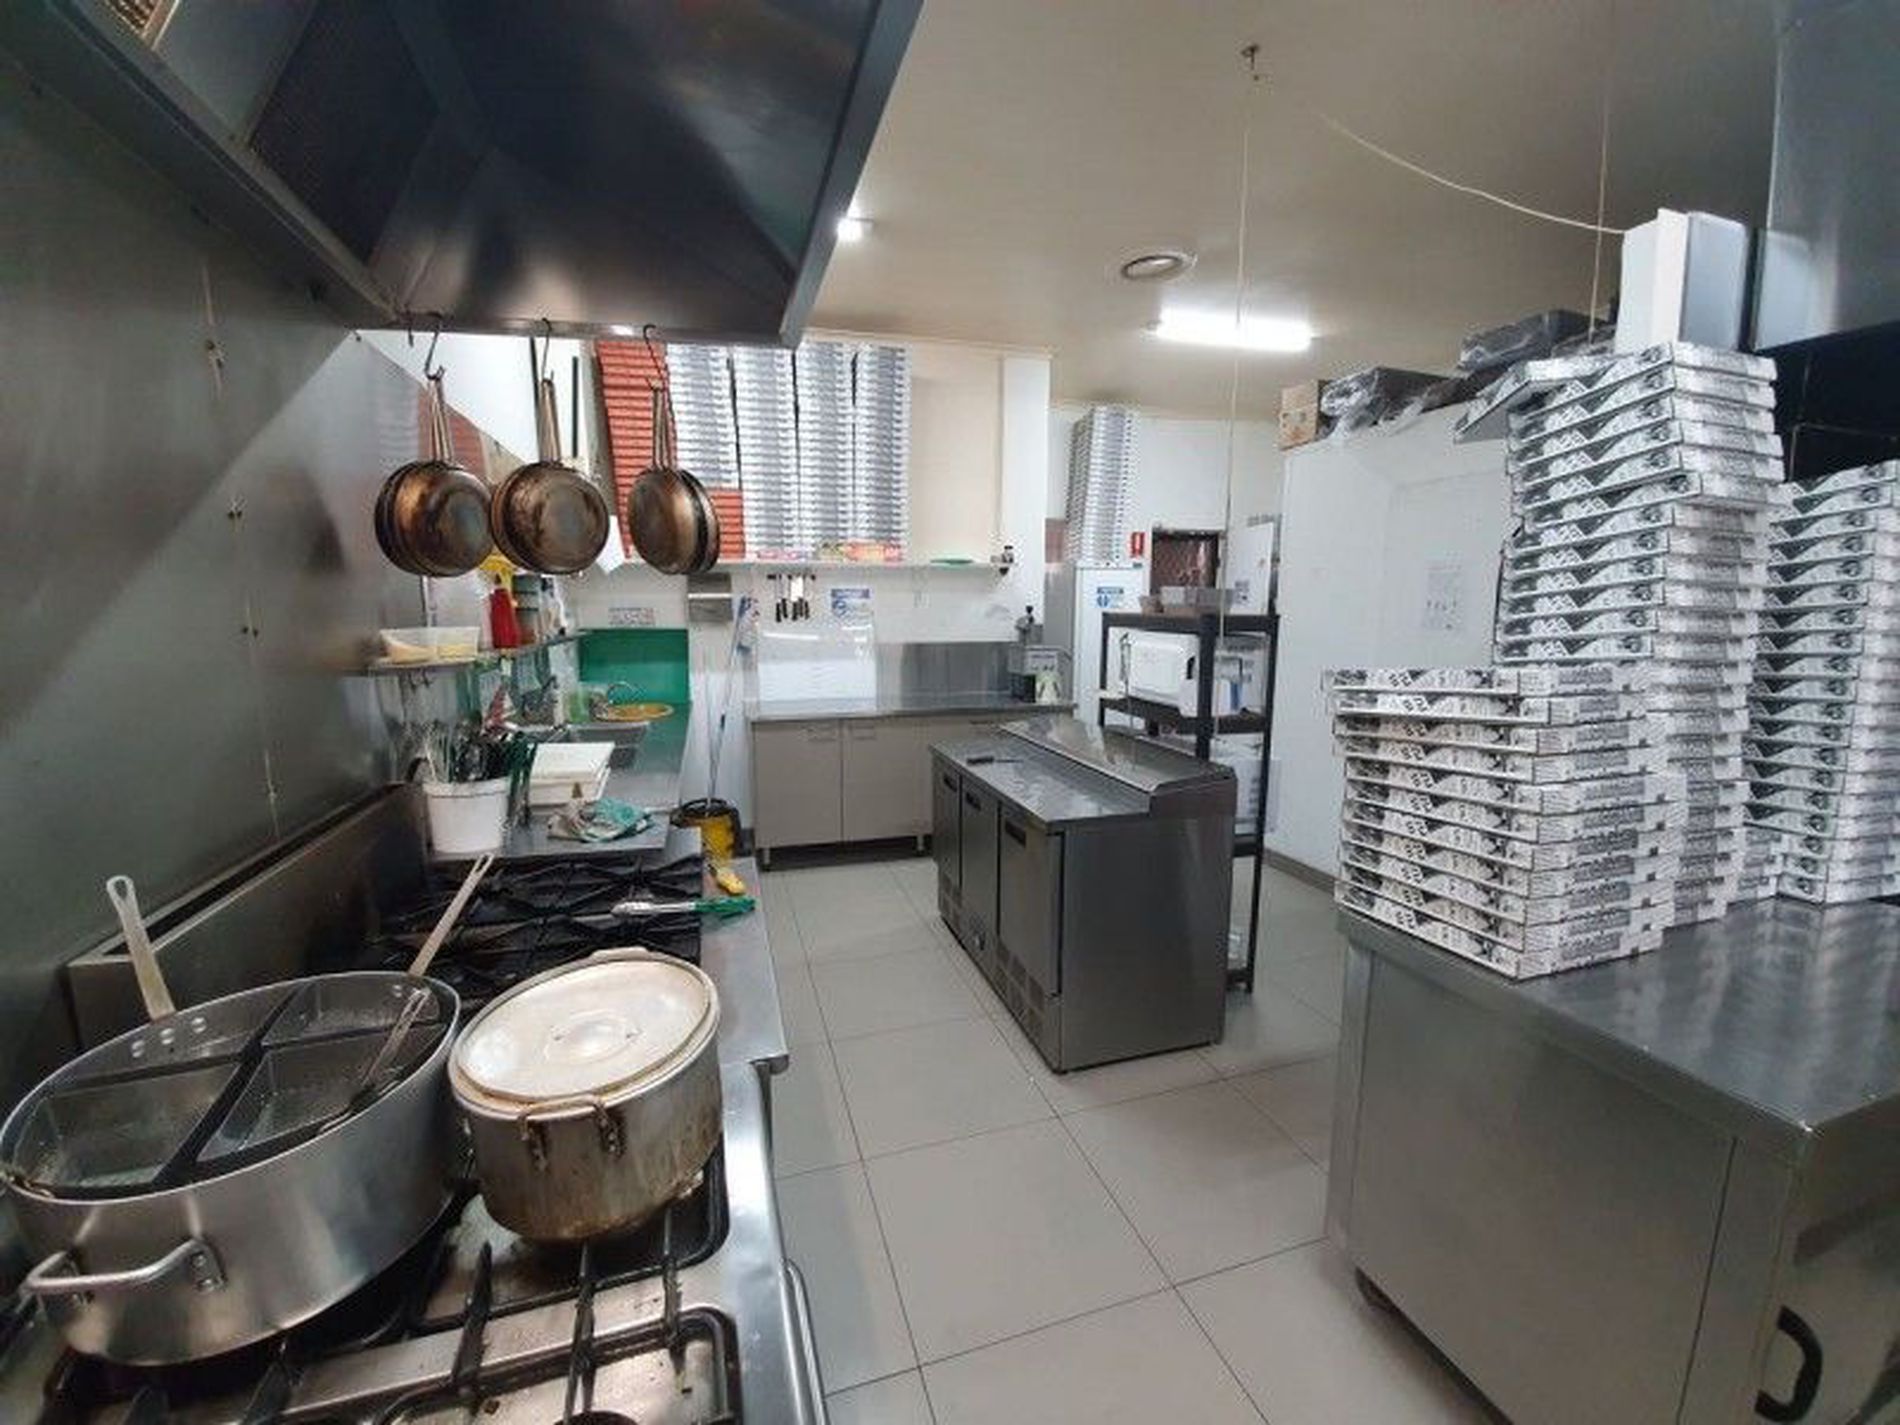 Pizza and Pasta Takeaway business for sale in Seaford